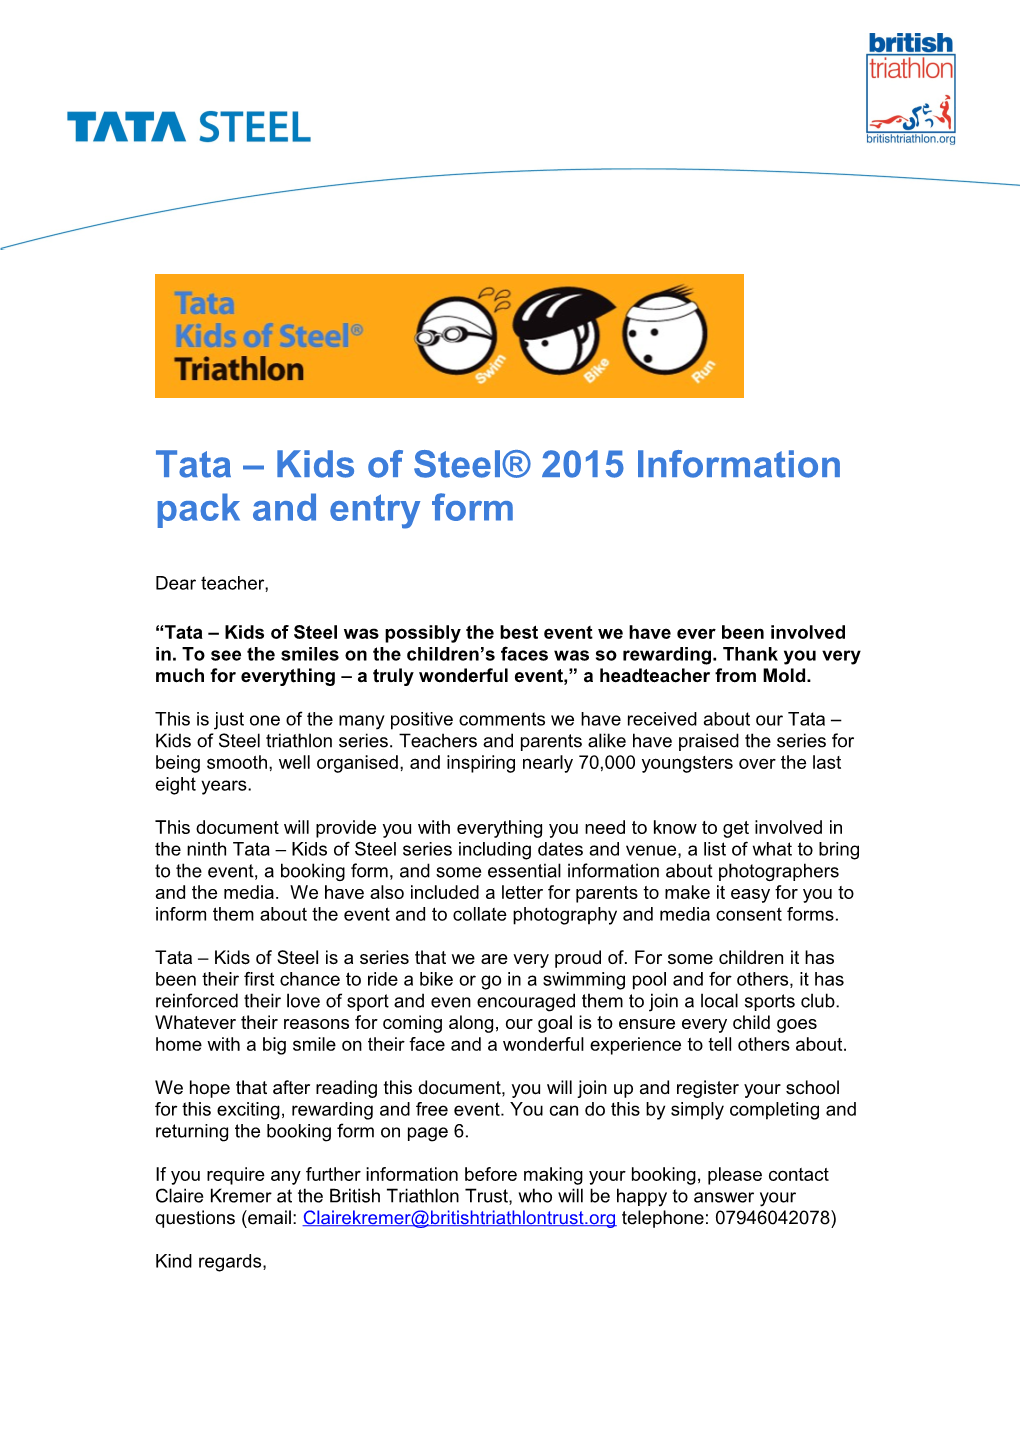 Tata Kids of Steel 2015 Information Pack and Entry Form